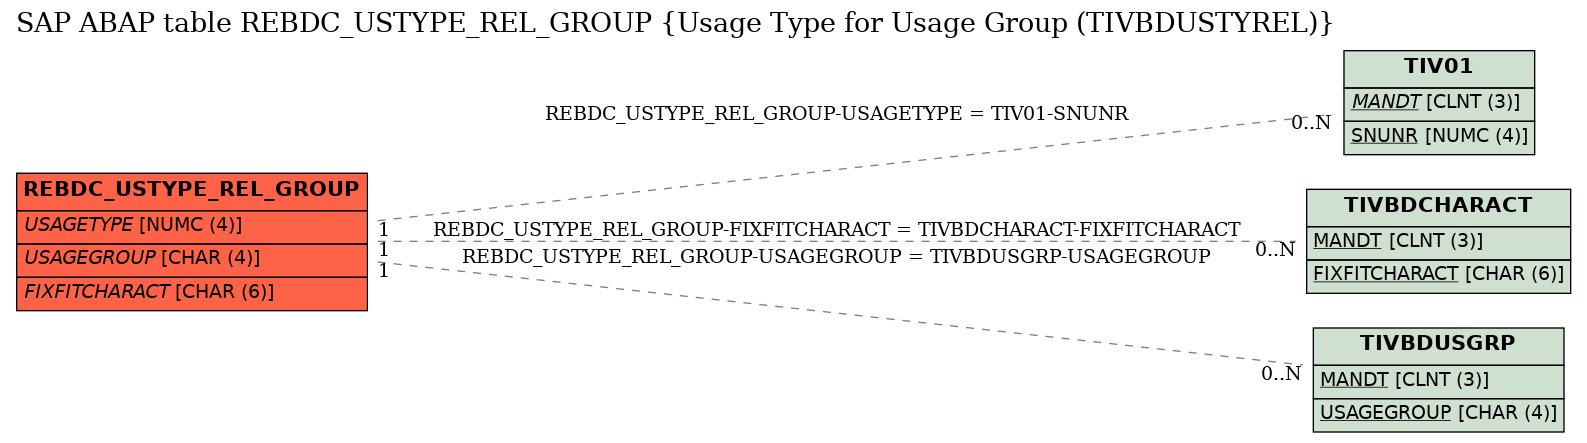 E-R Diagram for table REBDC_USTYPE_REL_GROUP (Usage Type for Usage Group (TIVBDUSTYREL))